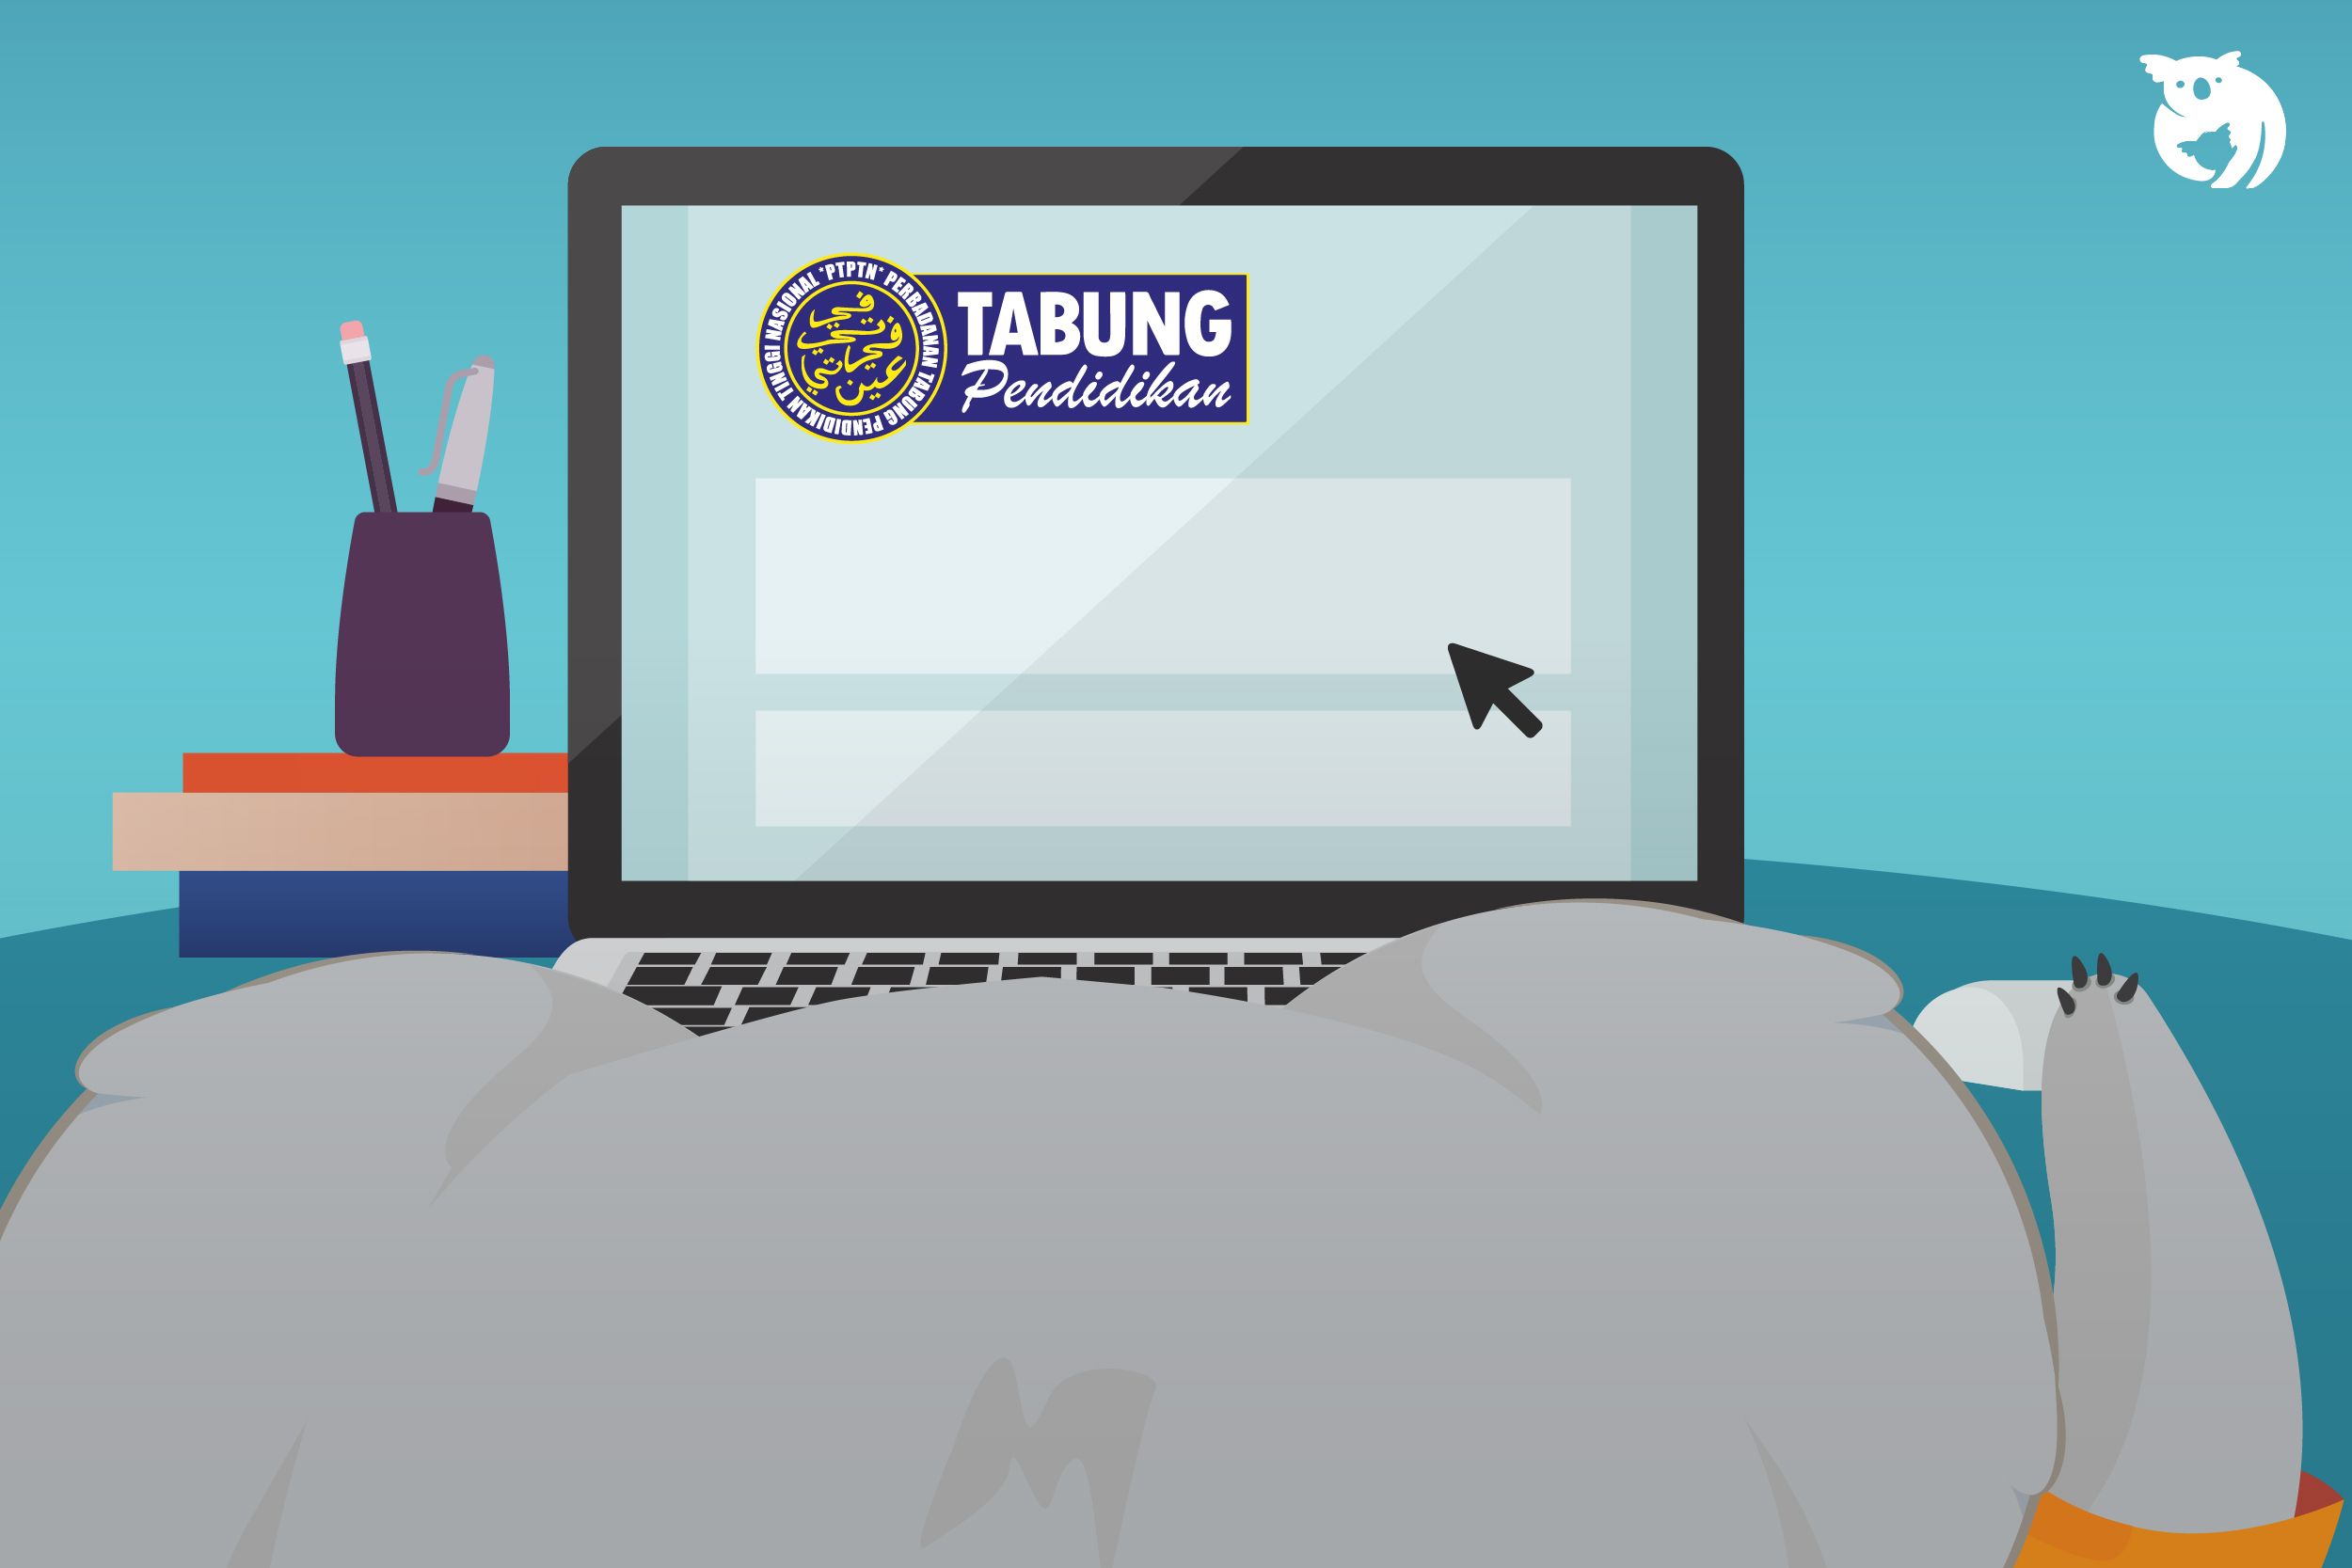 A Comprehensive Guide on How to Pay PTPTN Online